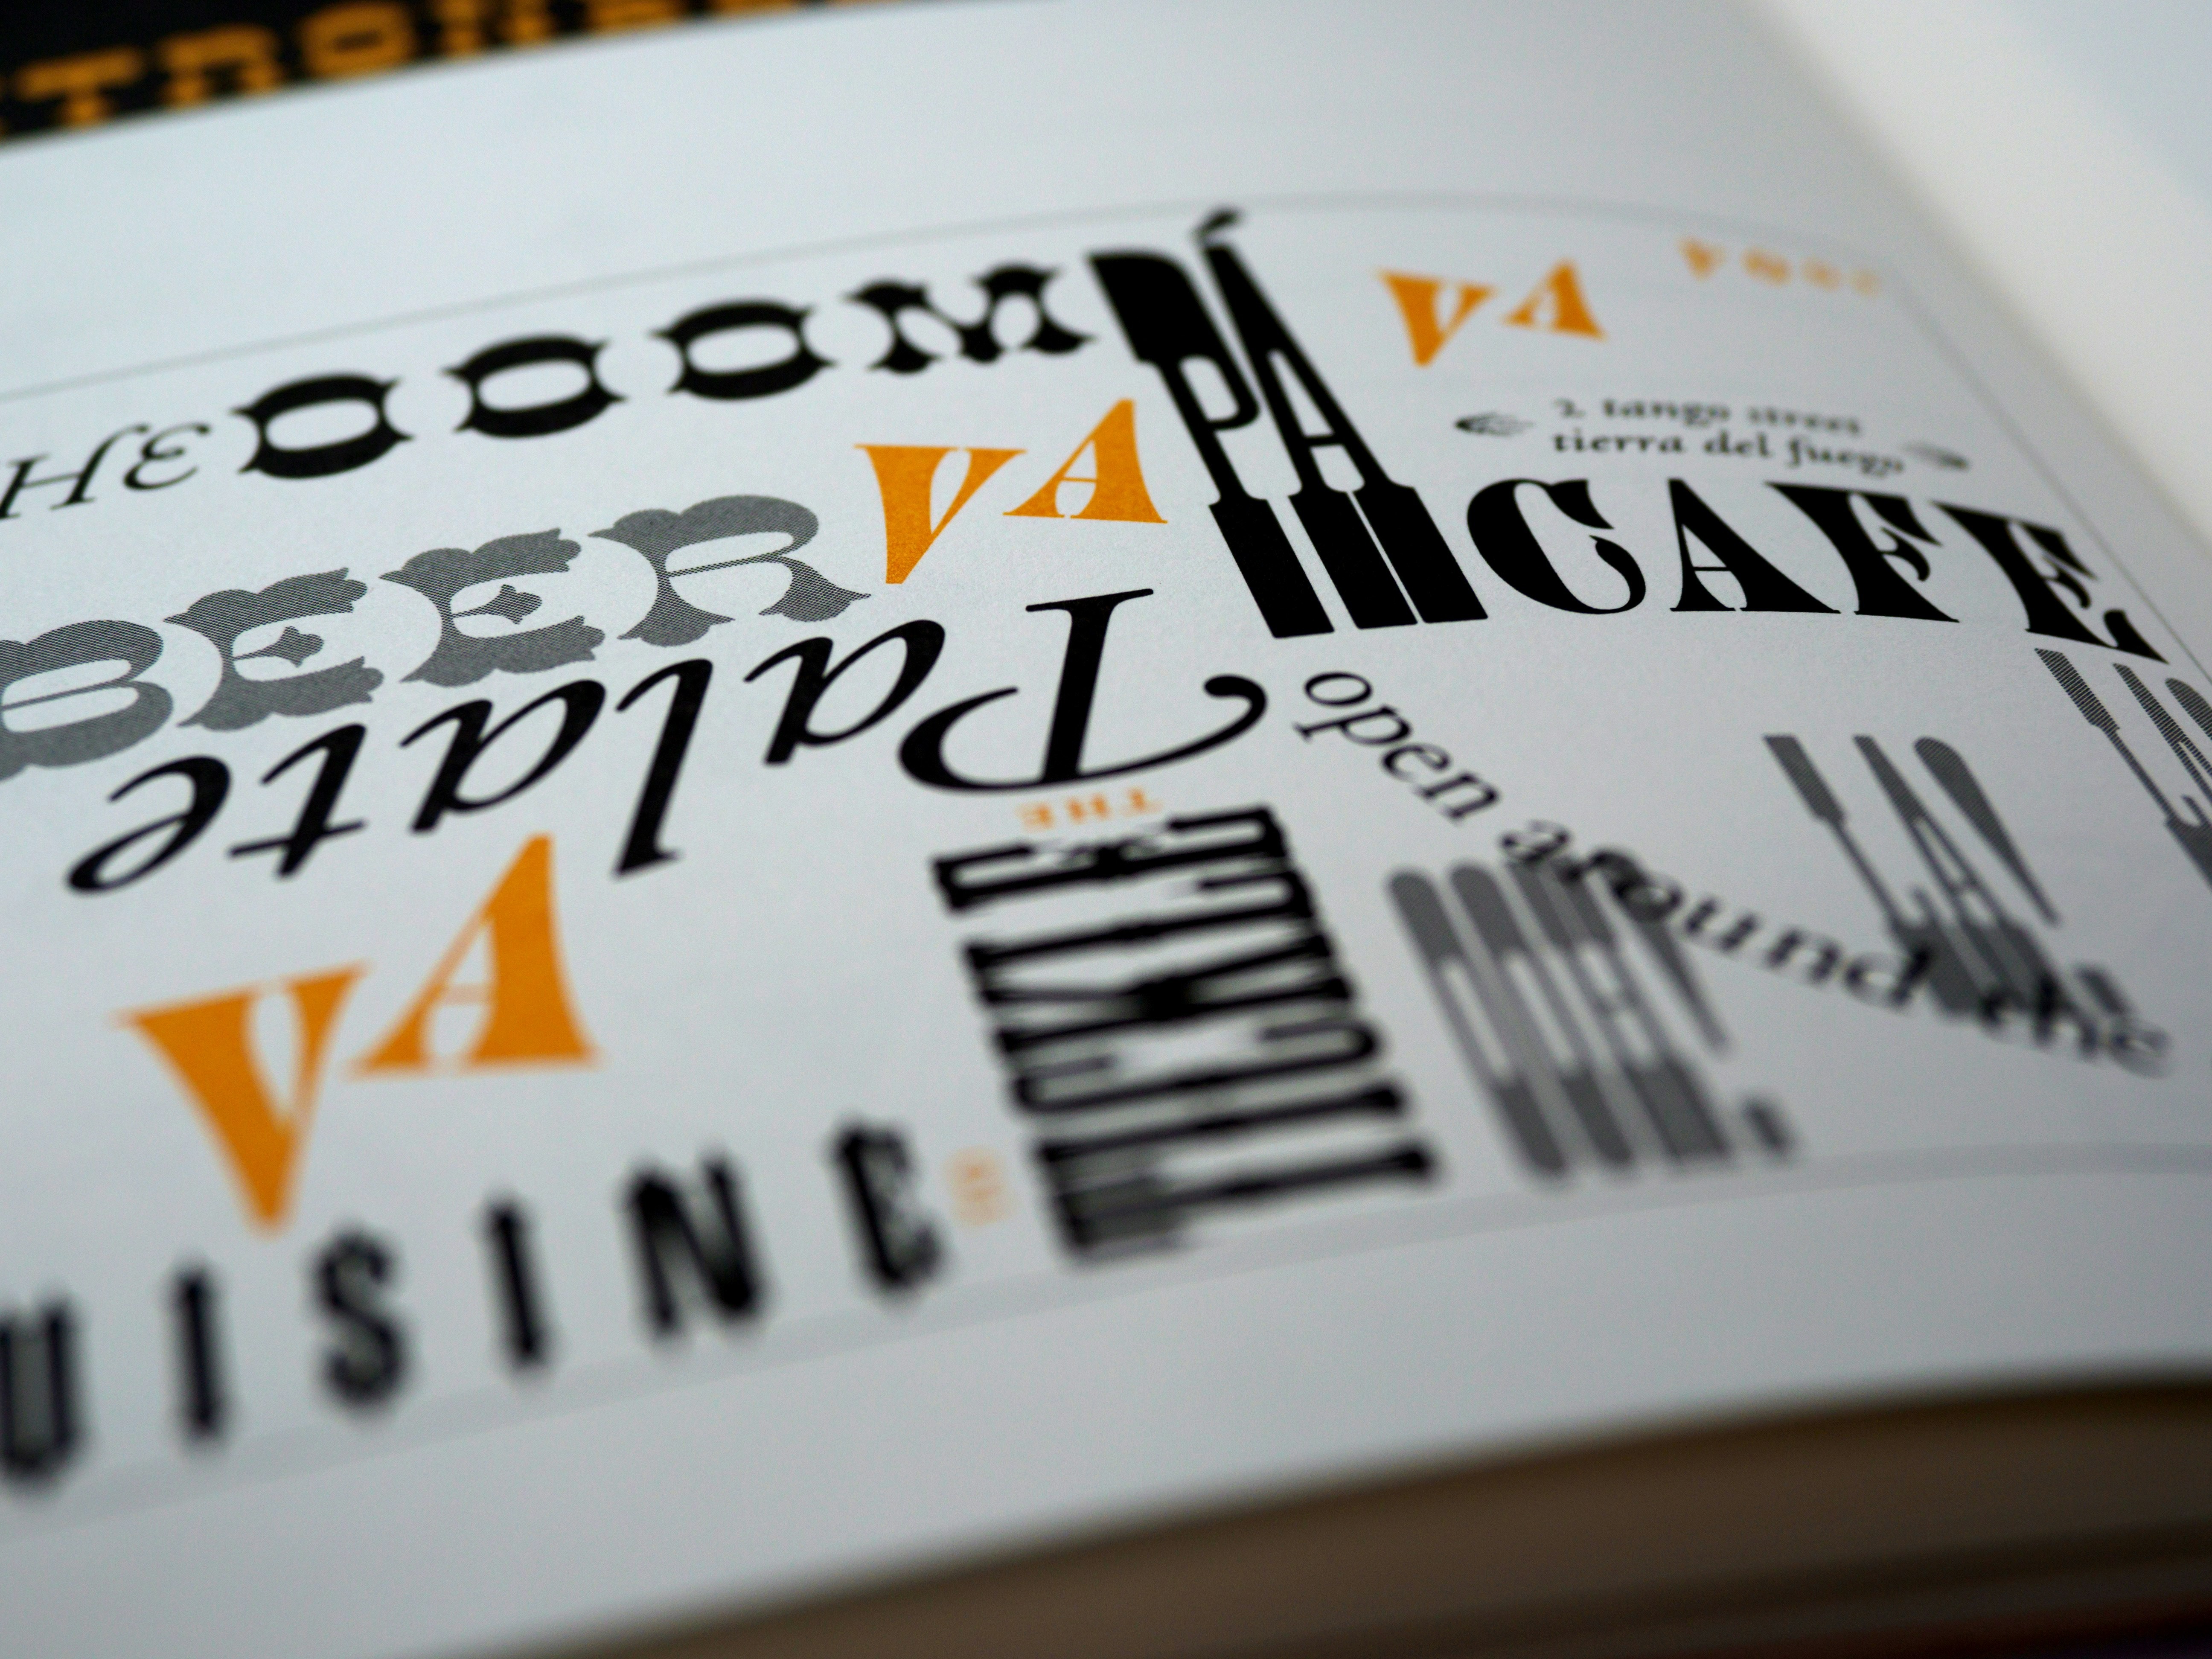 Jake Archibald – In your @font-face